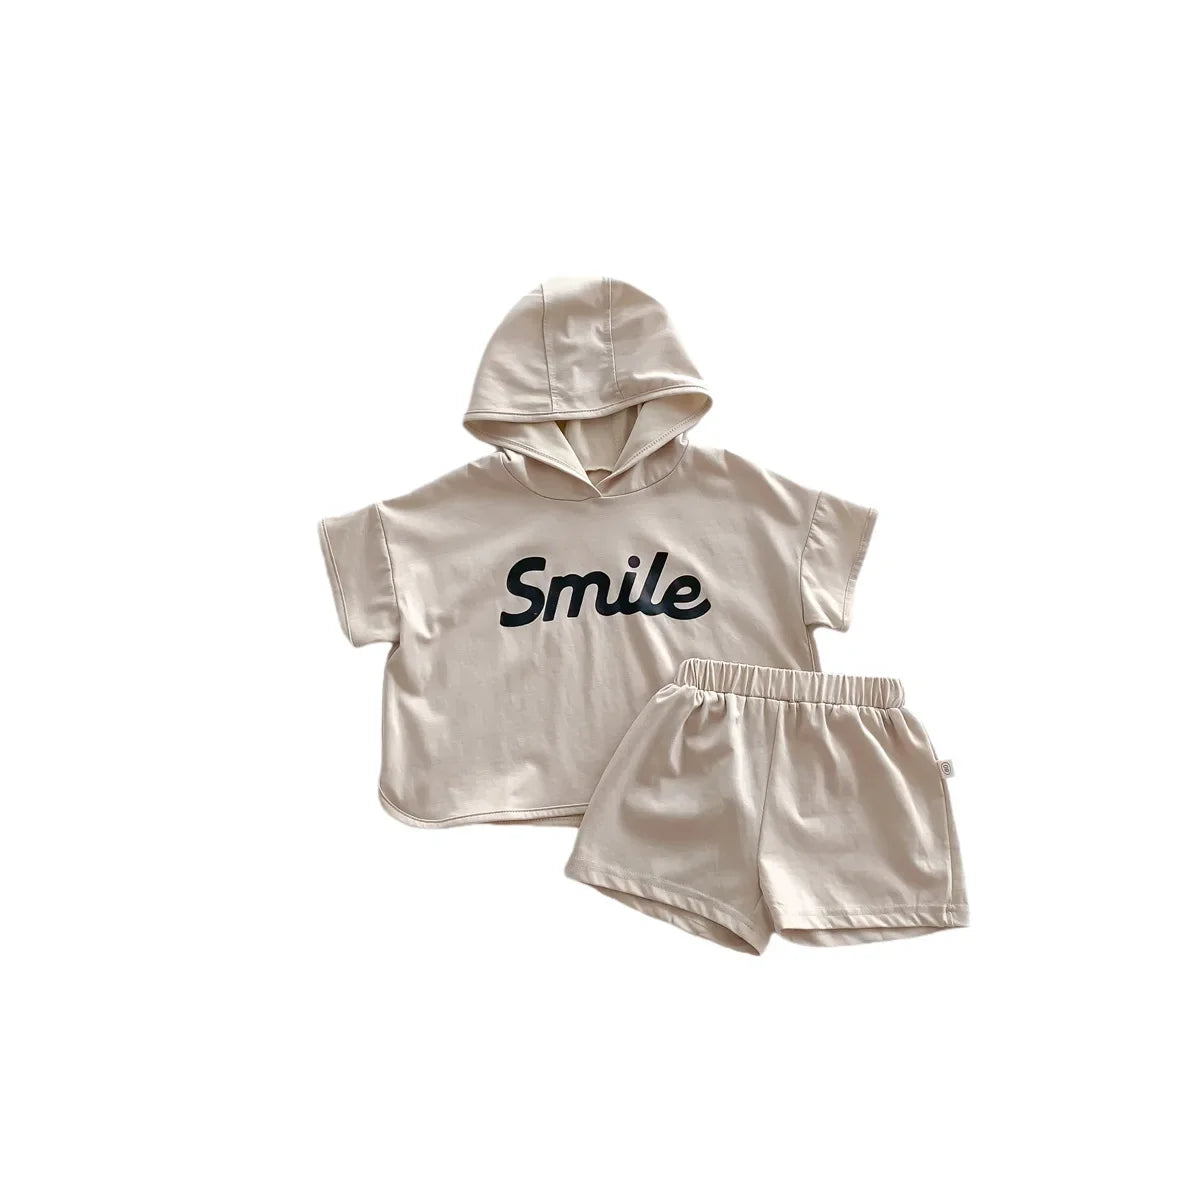 Boys Beige Hooded T shirt 'Smile' and matching shorts